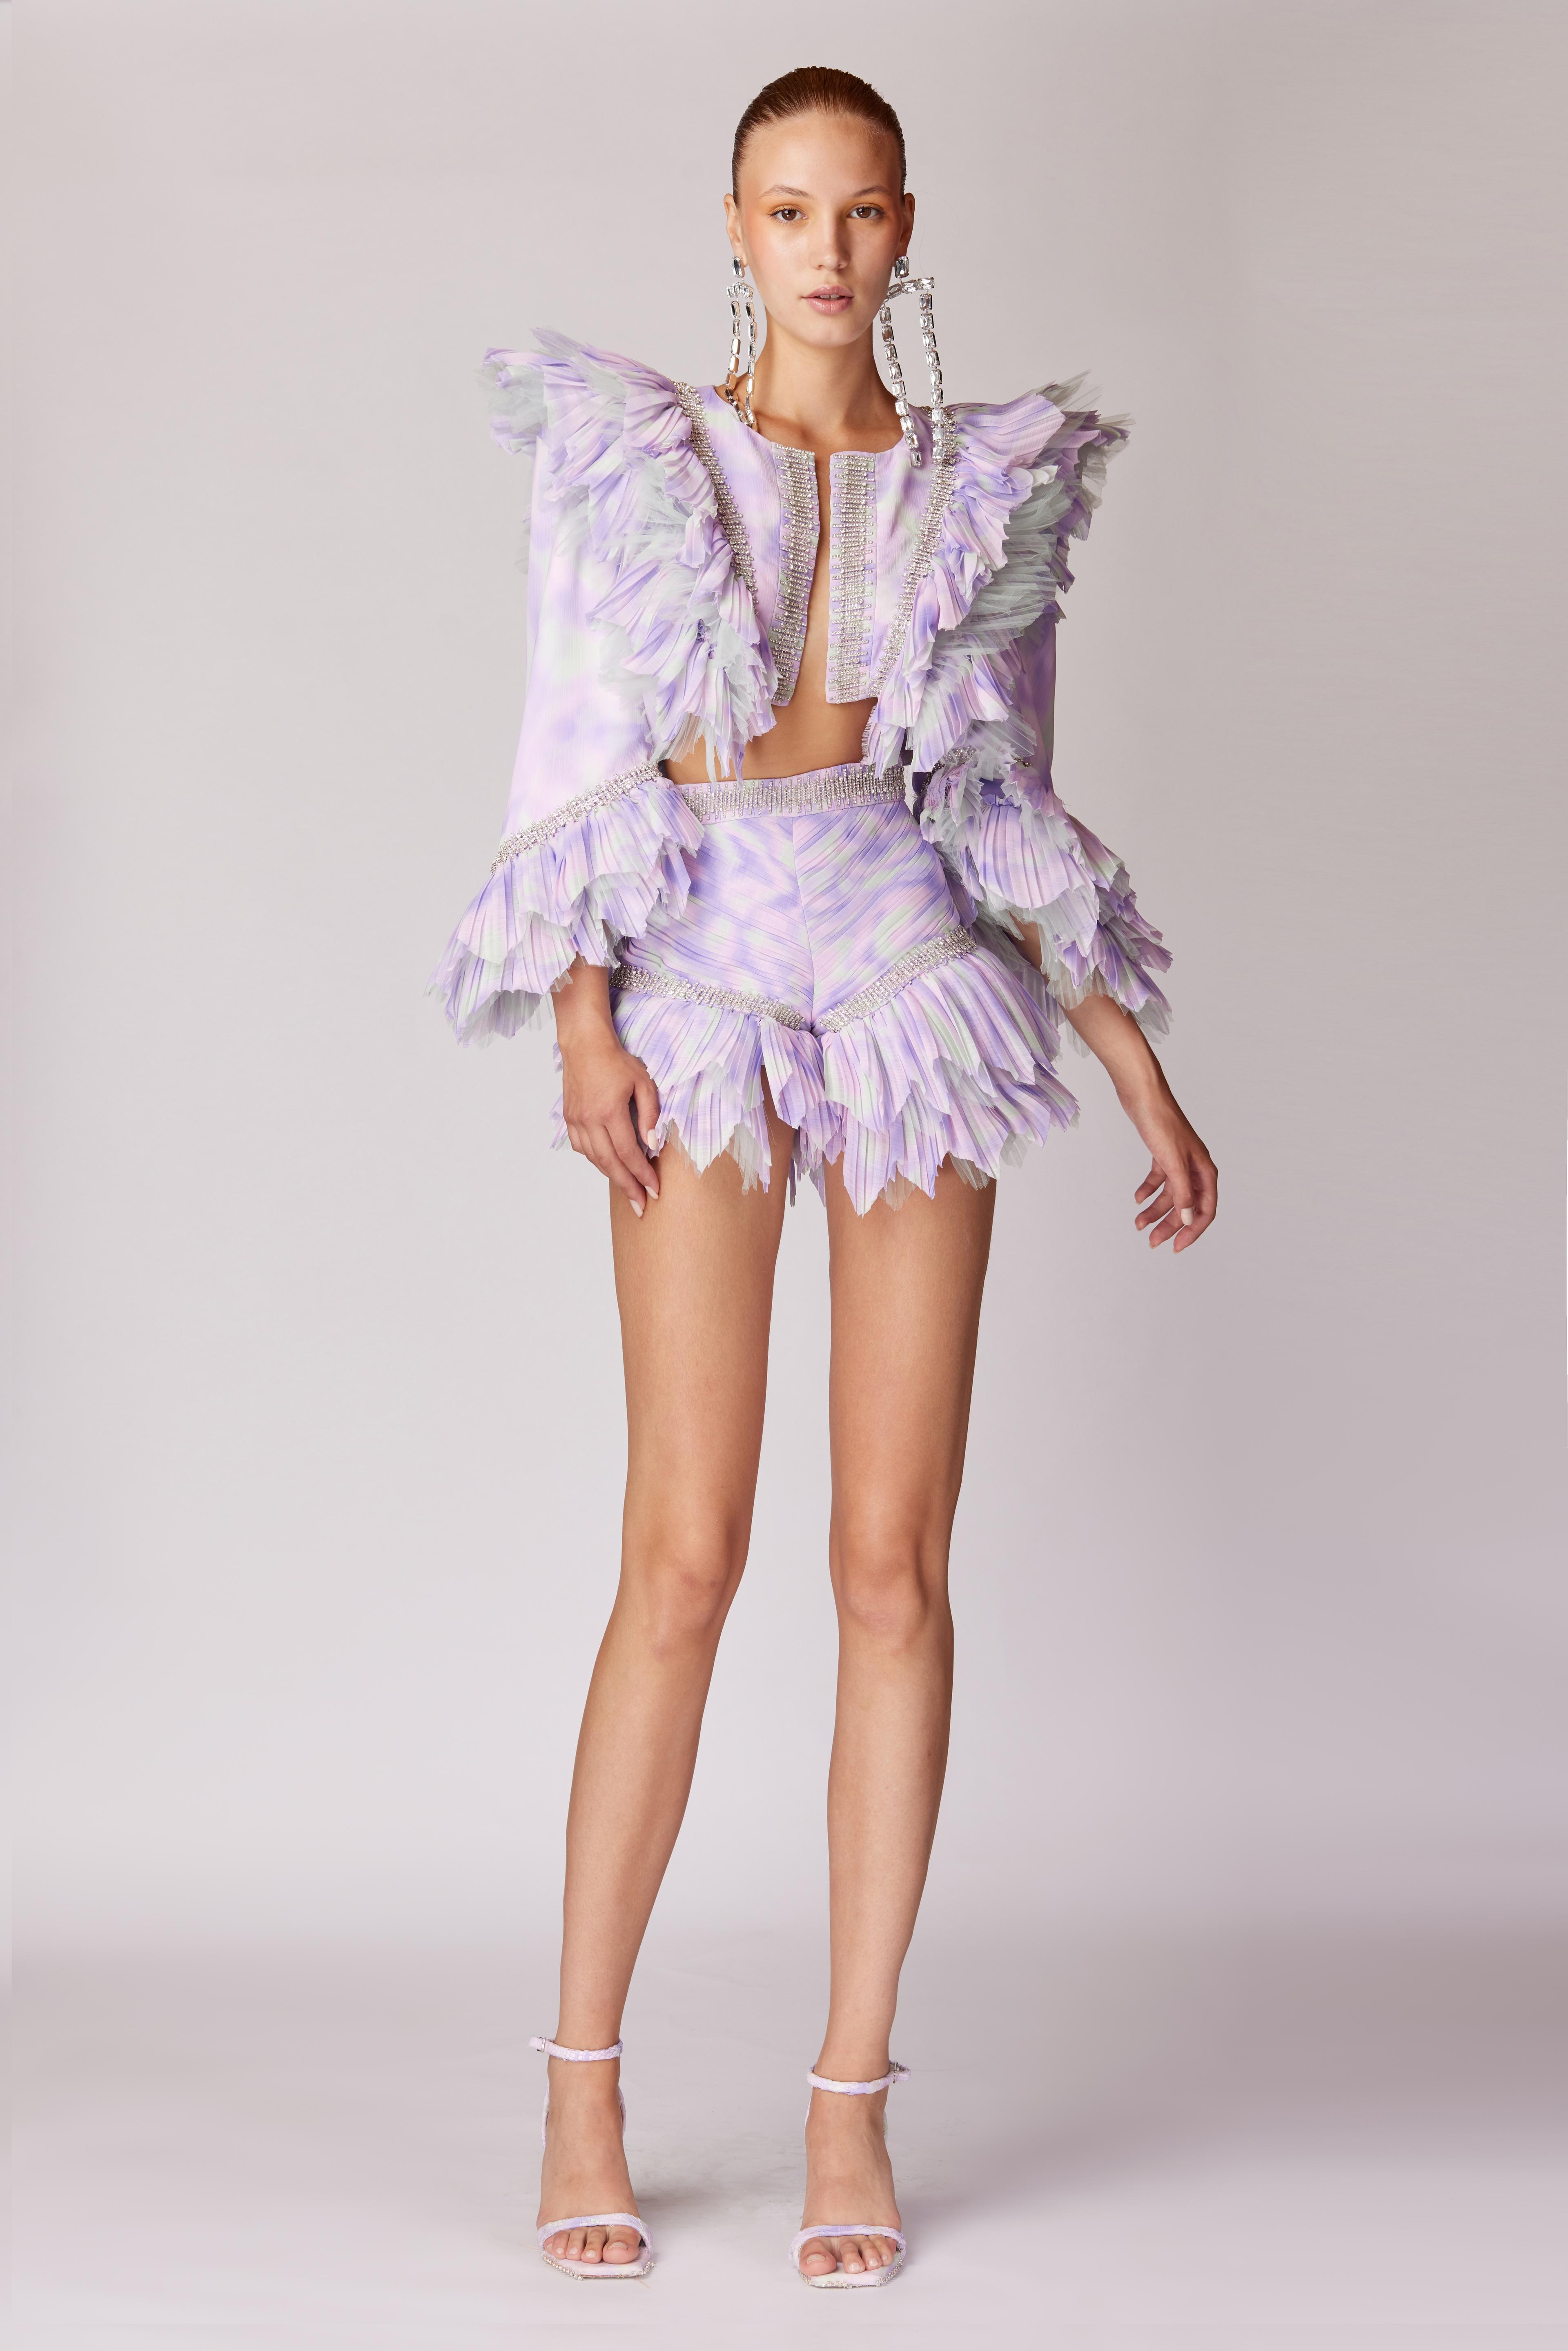 Stone Printed And Patterned Mini Jacket With Asymmetriacal Pleated Frills & Mini Short